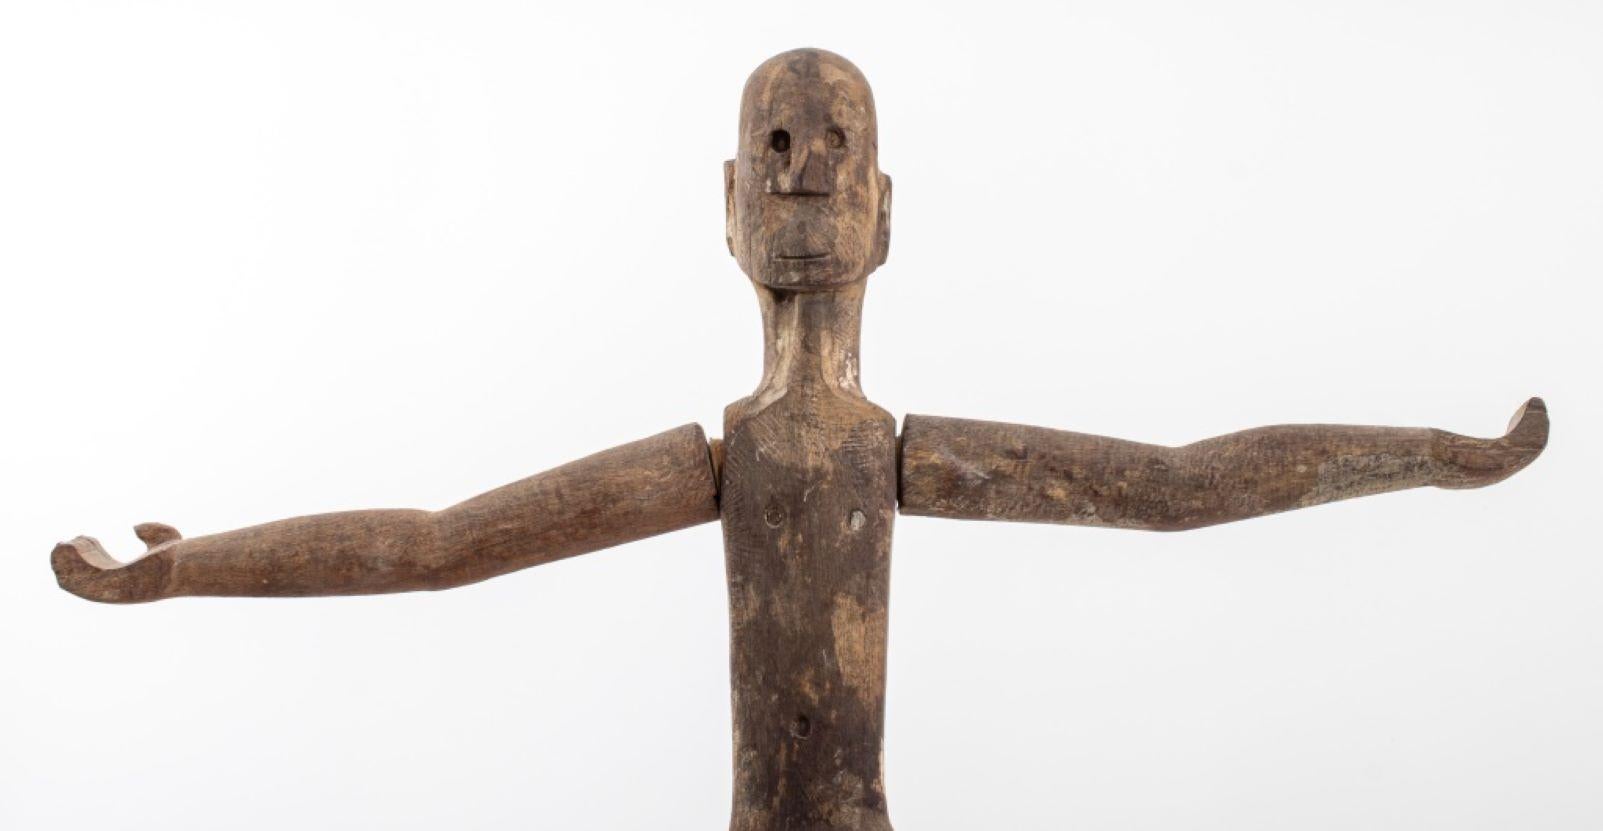 Indonesian Wood Patung Polisi Guardian Sculpture, 19th century, West Borneo, depicting a standing male figure with arms outstretched, smiling face, on original wood base with floral carving and mounted to metal base. 33